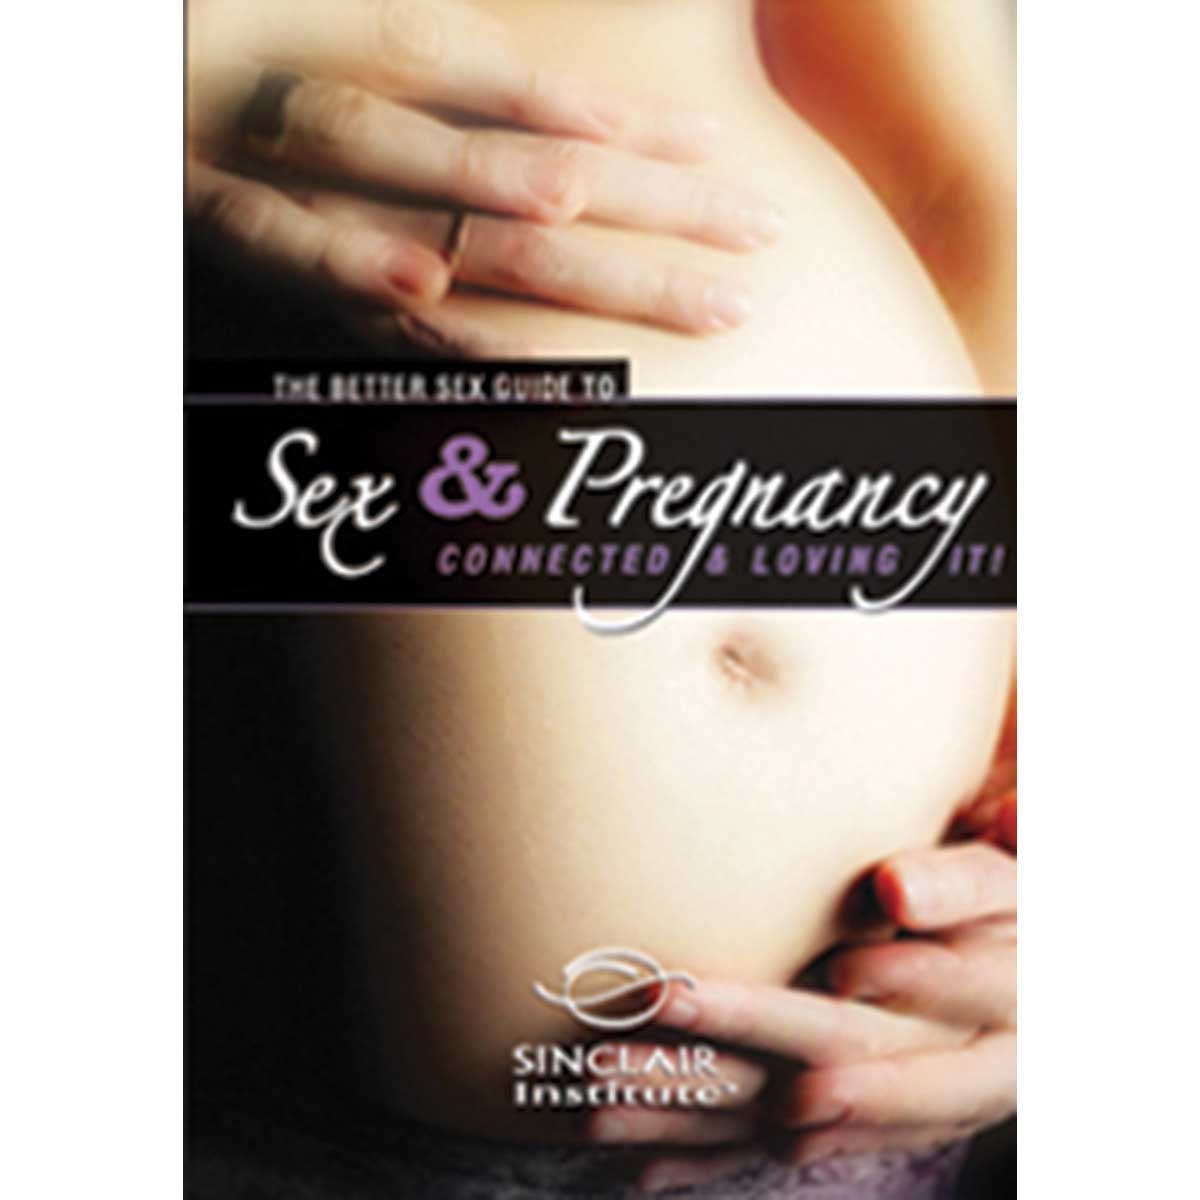 Sex & Pregnancy - Better Sex Guide - Connected & Loving It - Sinclair Institute